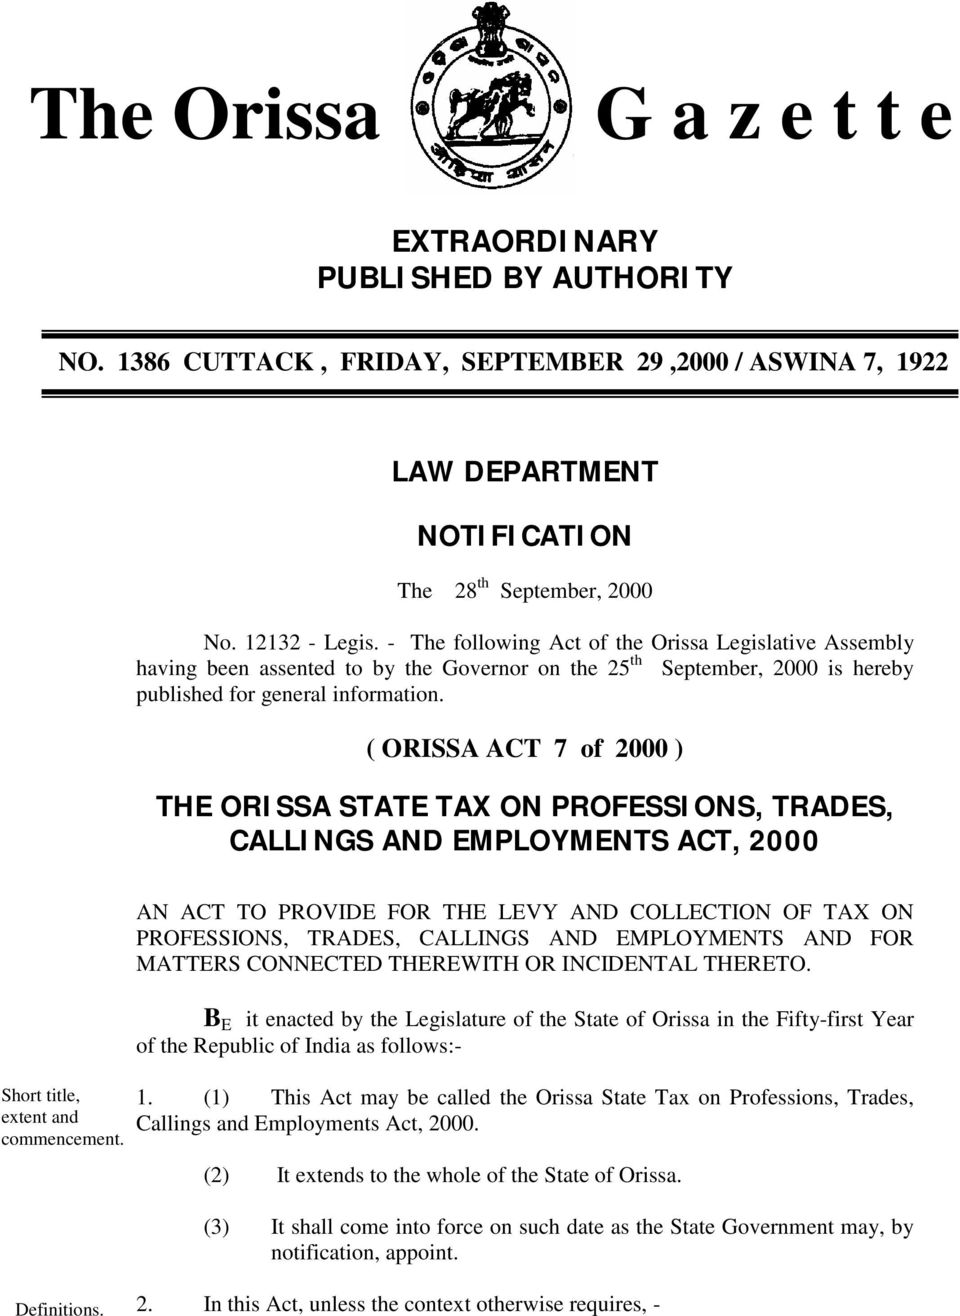 ( ORISSA ACT 7 of 2000 ) THE ORISSA STATE TAX ON PROFESSIONS, TRADES, CALLINGS AND EMPLOYMENTS ACT, 2000 Short title, extent and commencement.